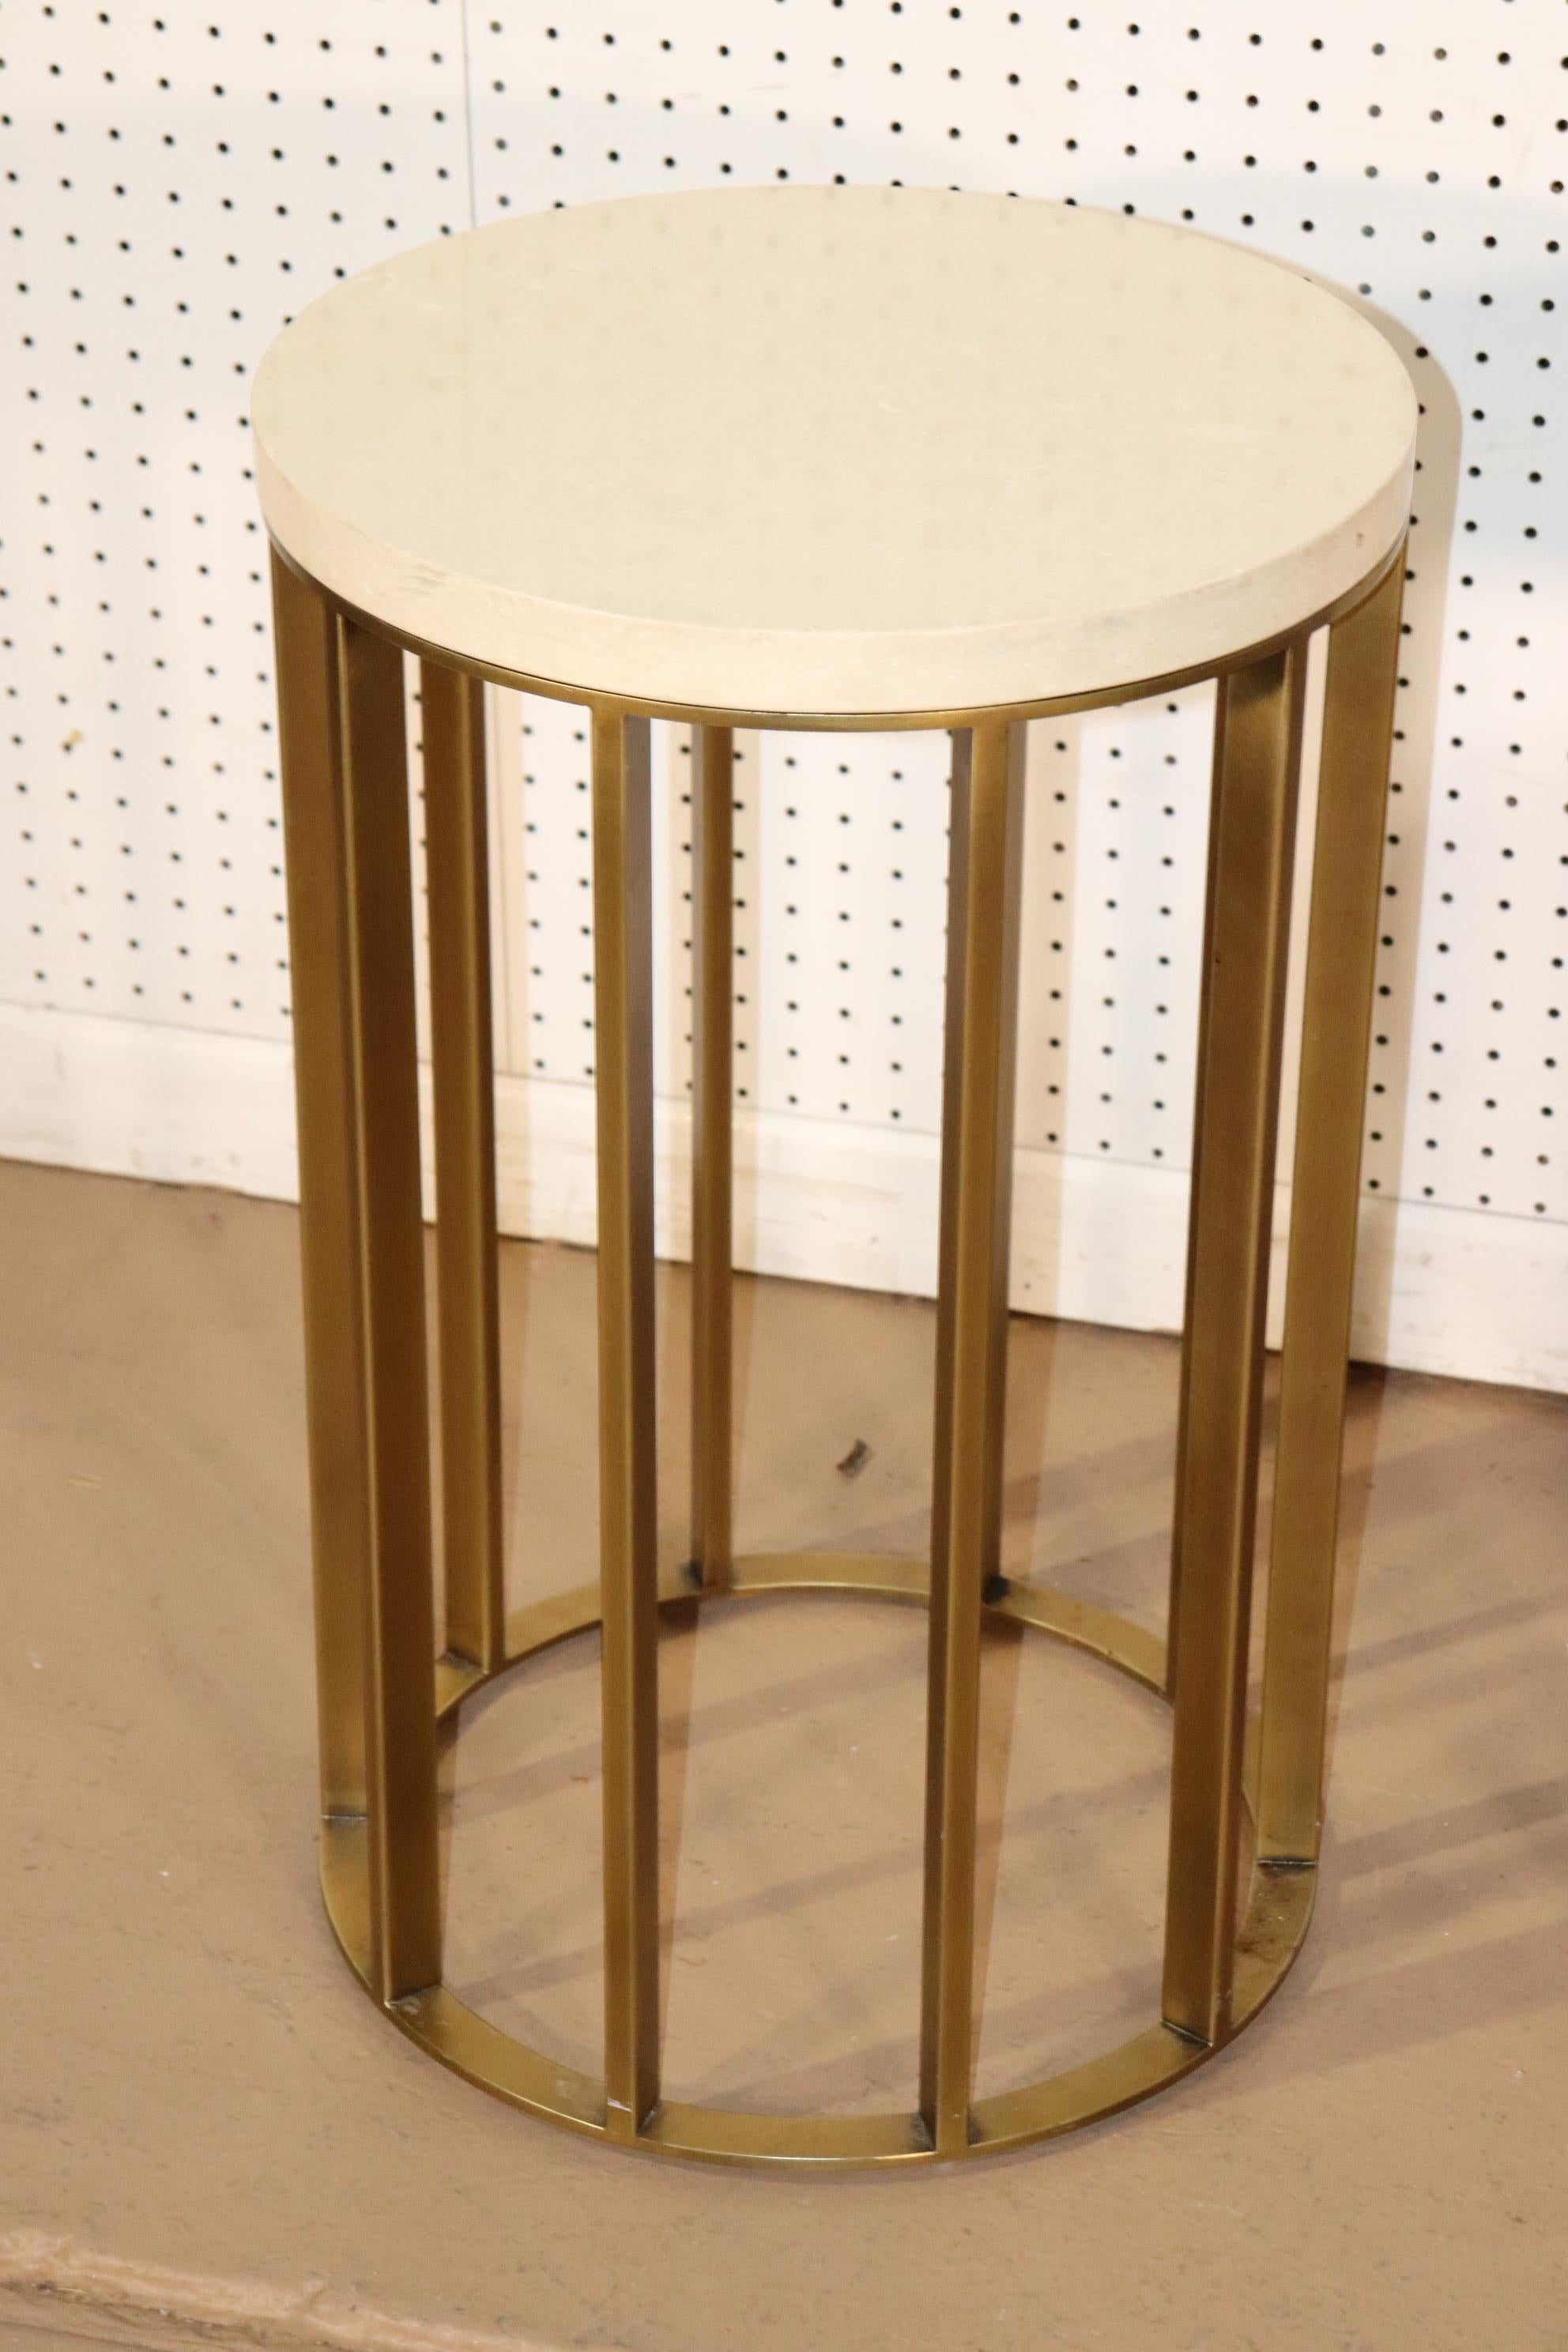 Italian Heavy Marble Top Modern Brass Round End Tables